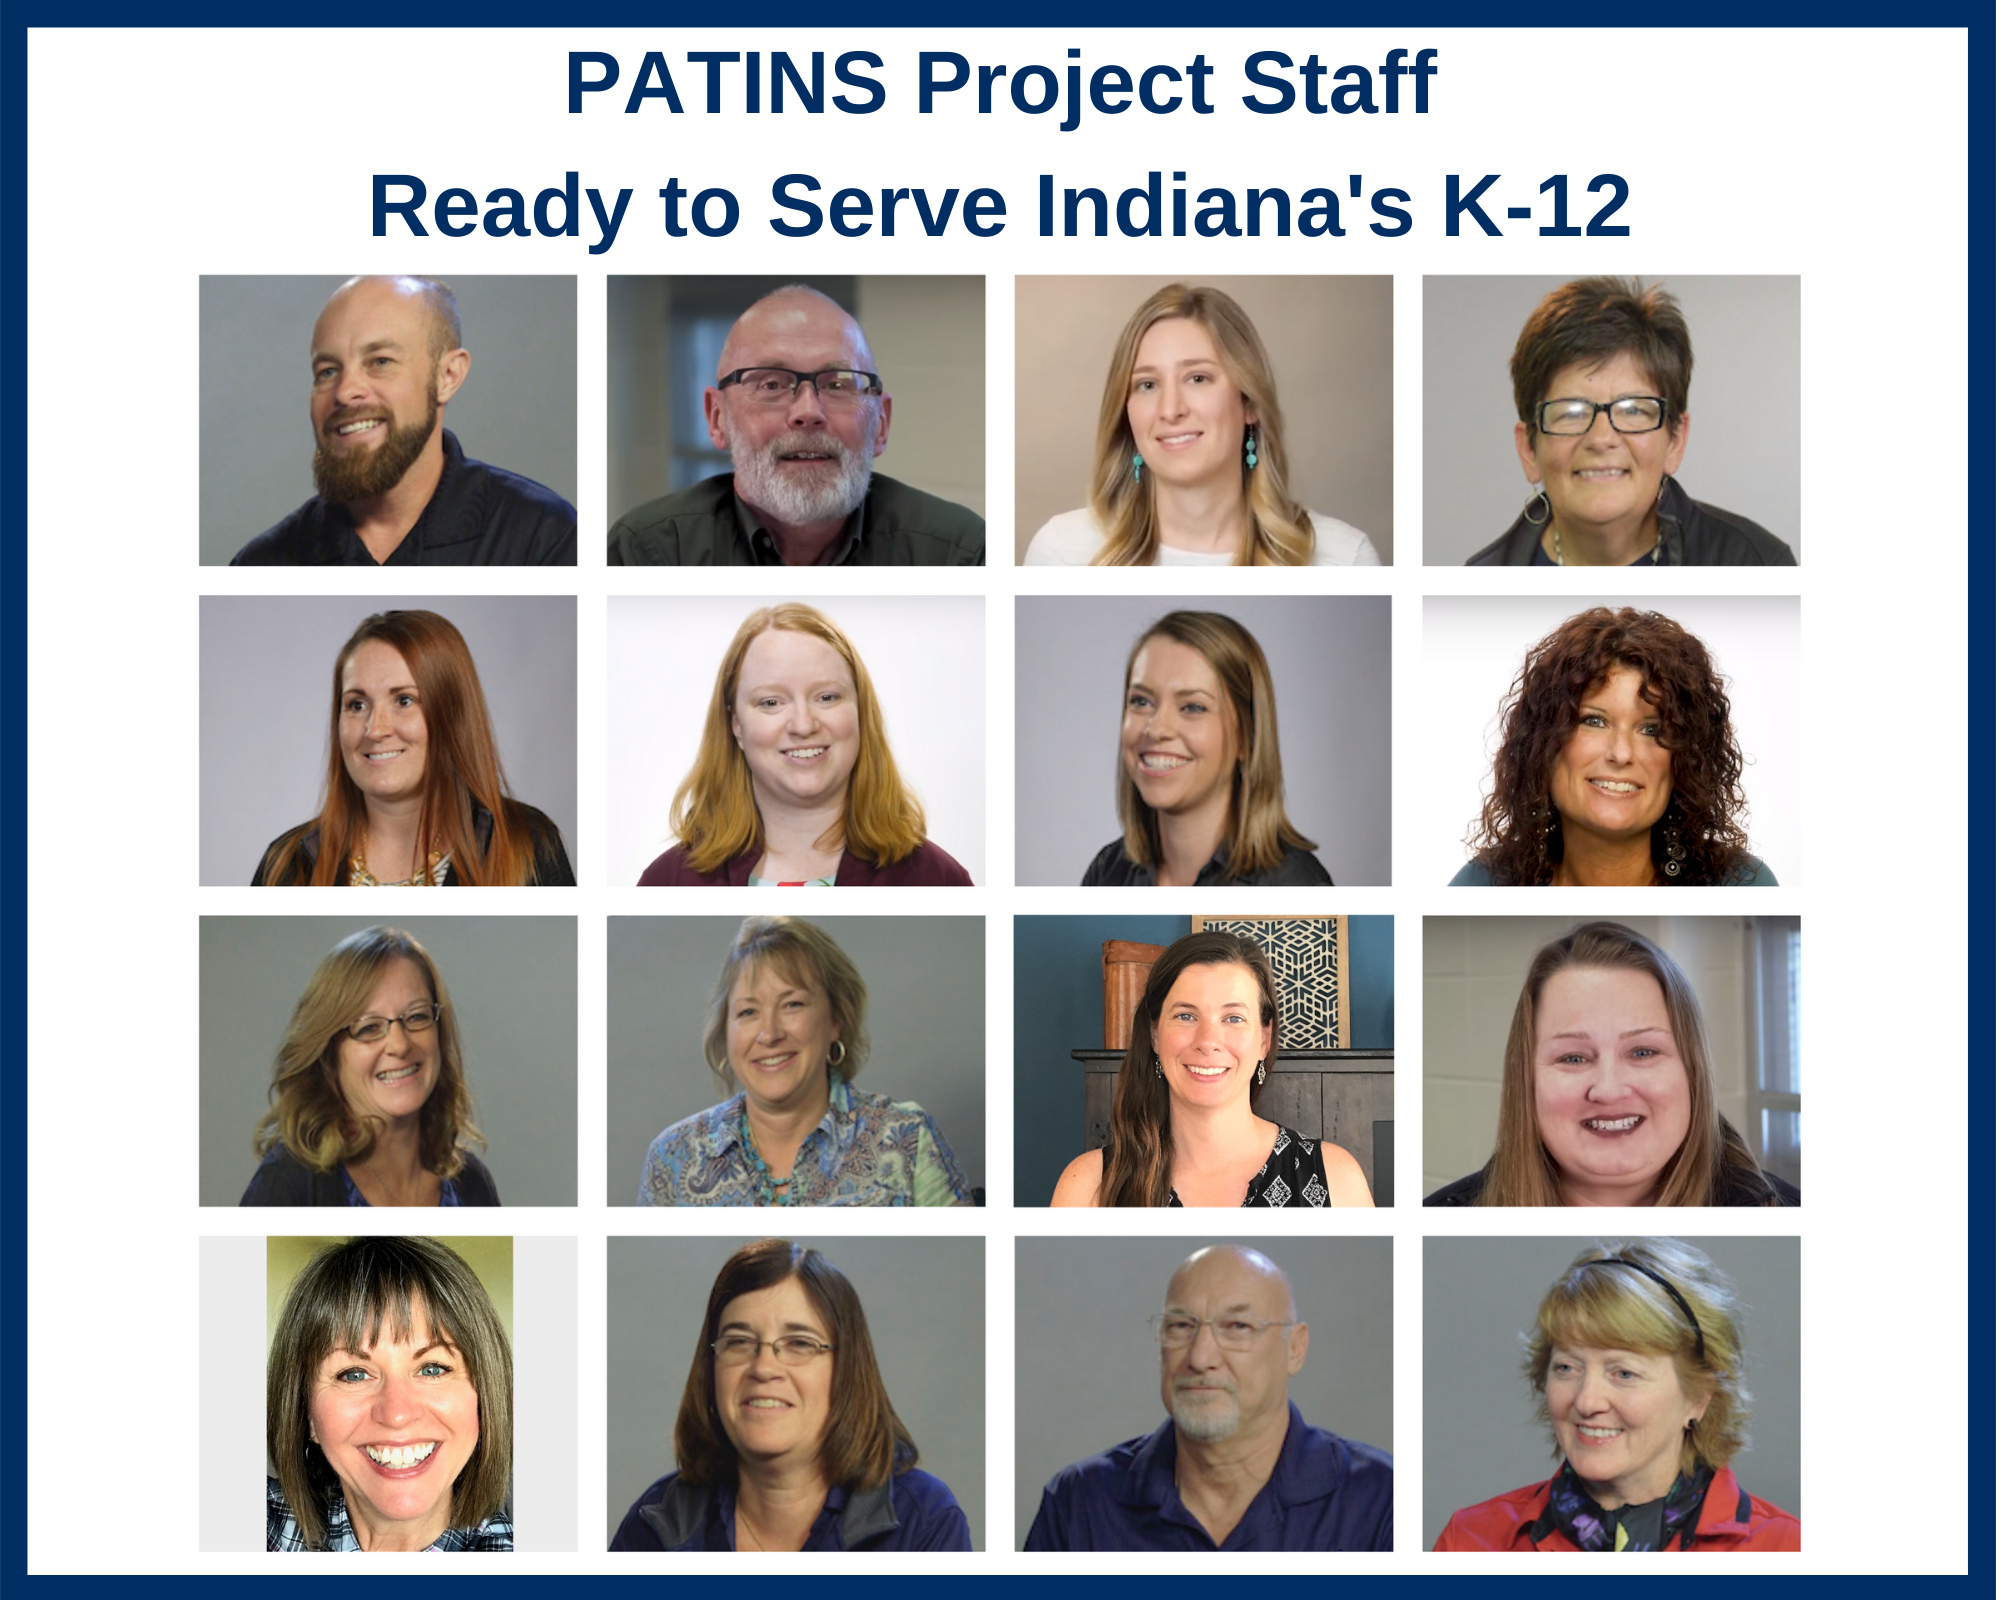 Staff Portrait Collage of the PATINS Project Staff